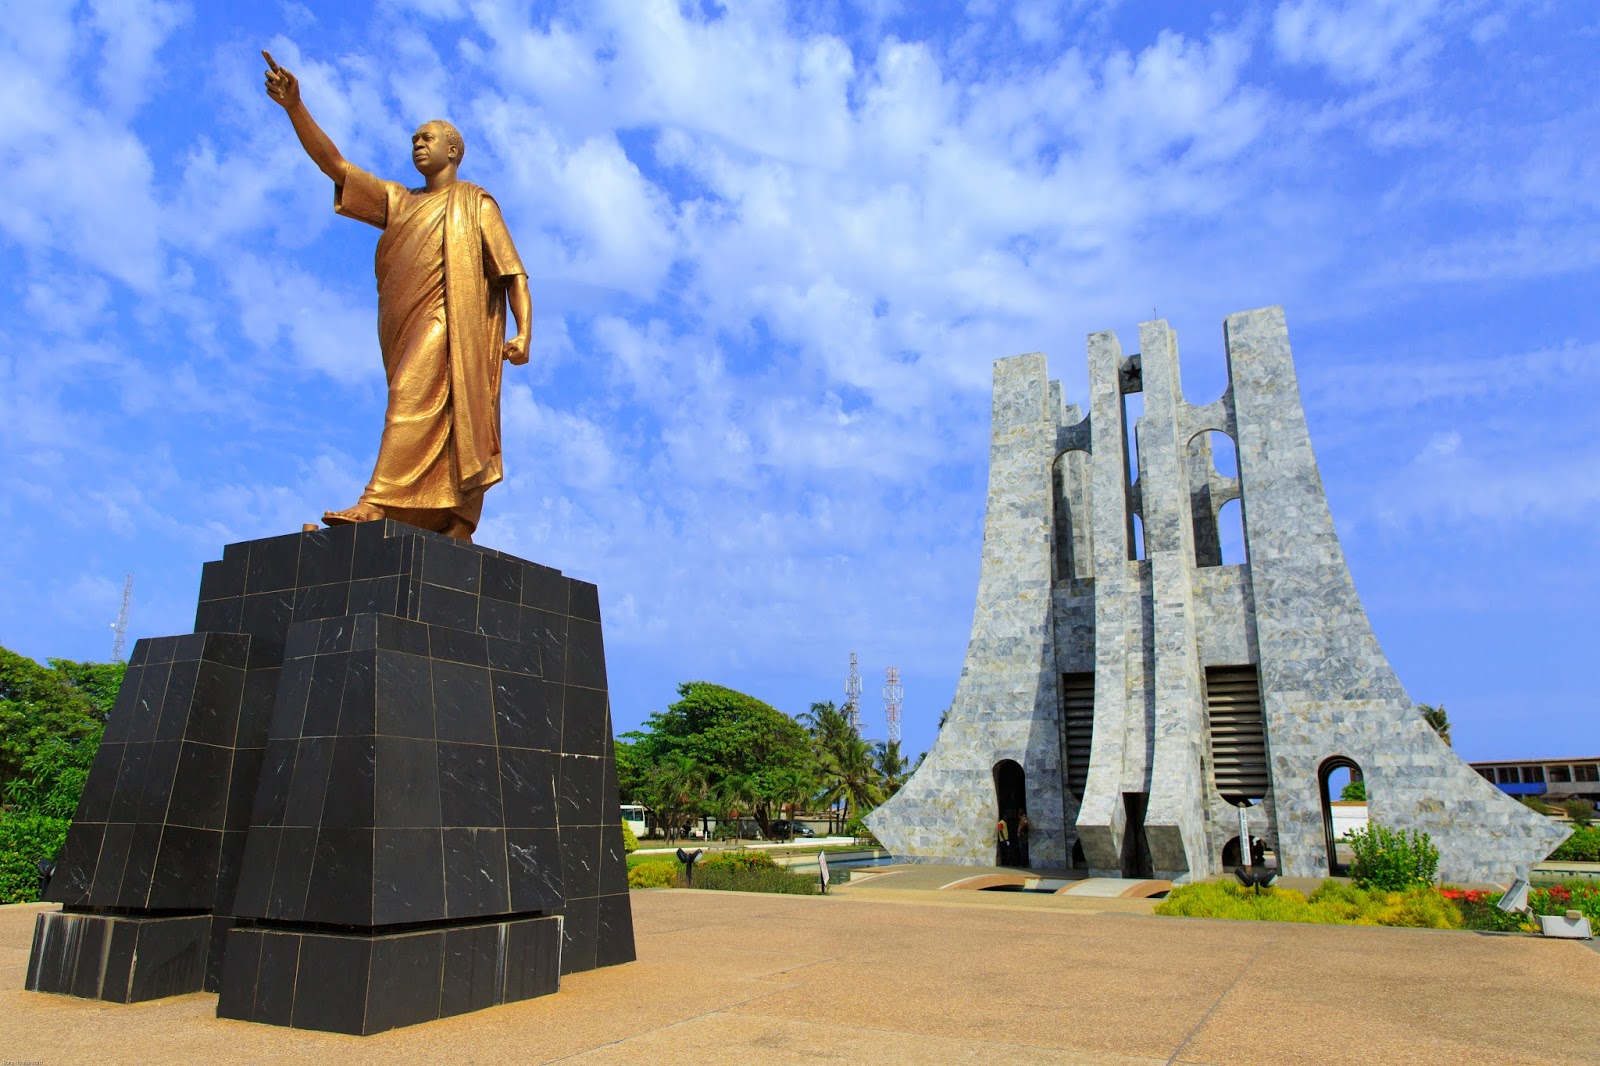 tourist sites in Ghana you should definitely visit